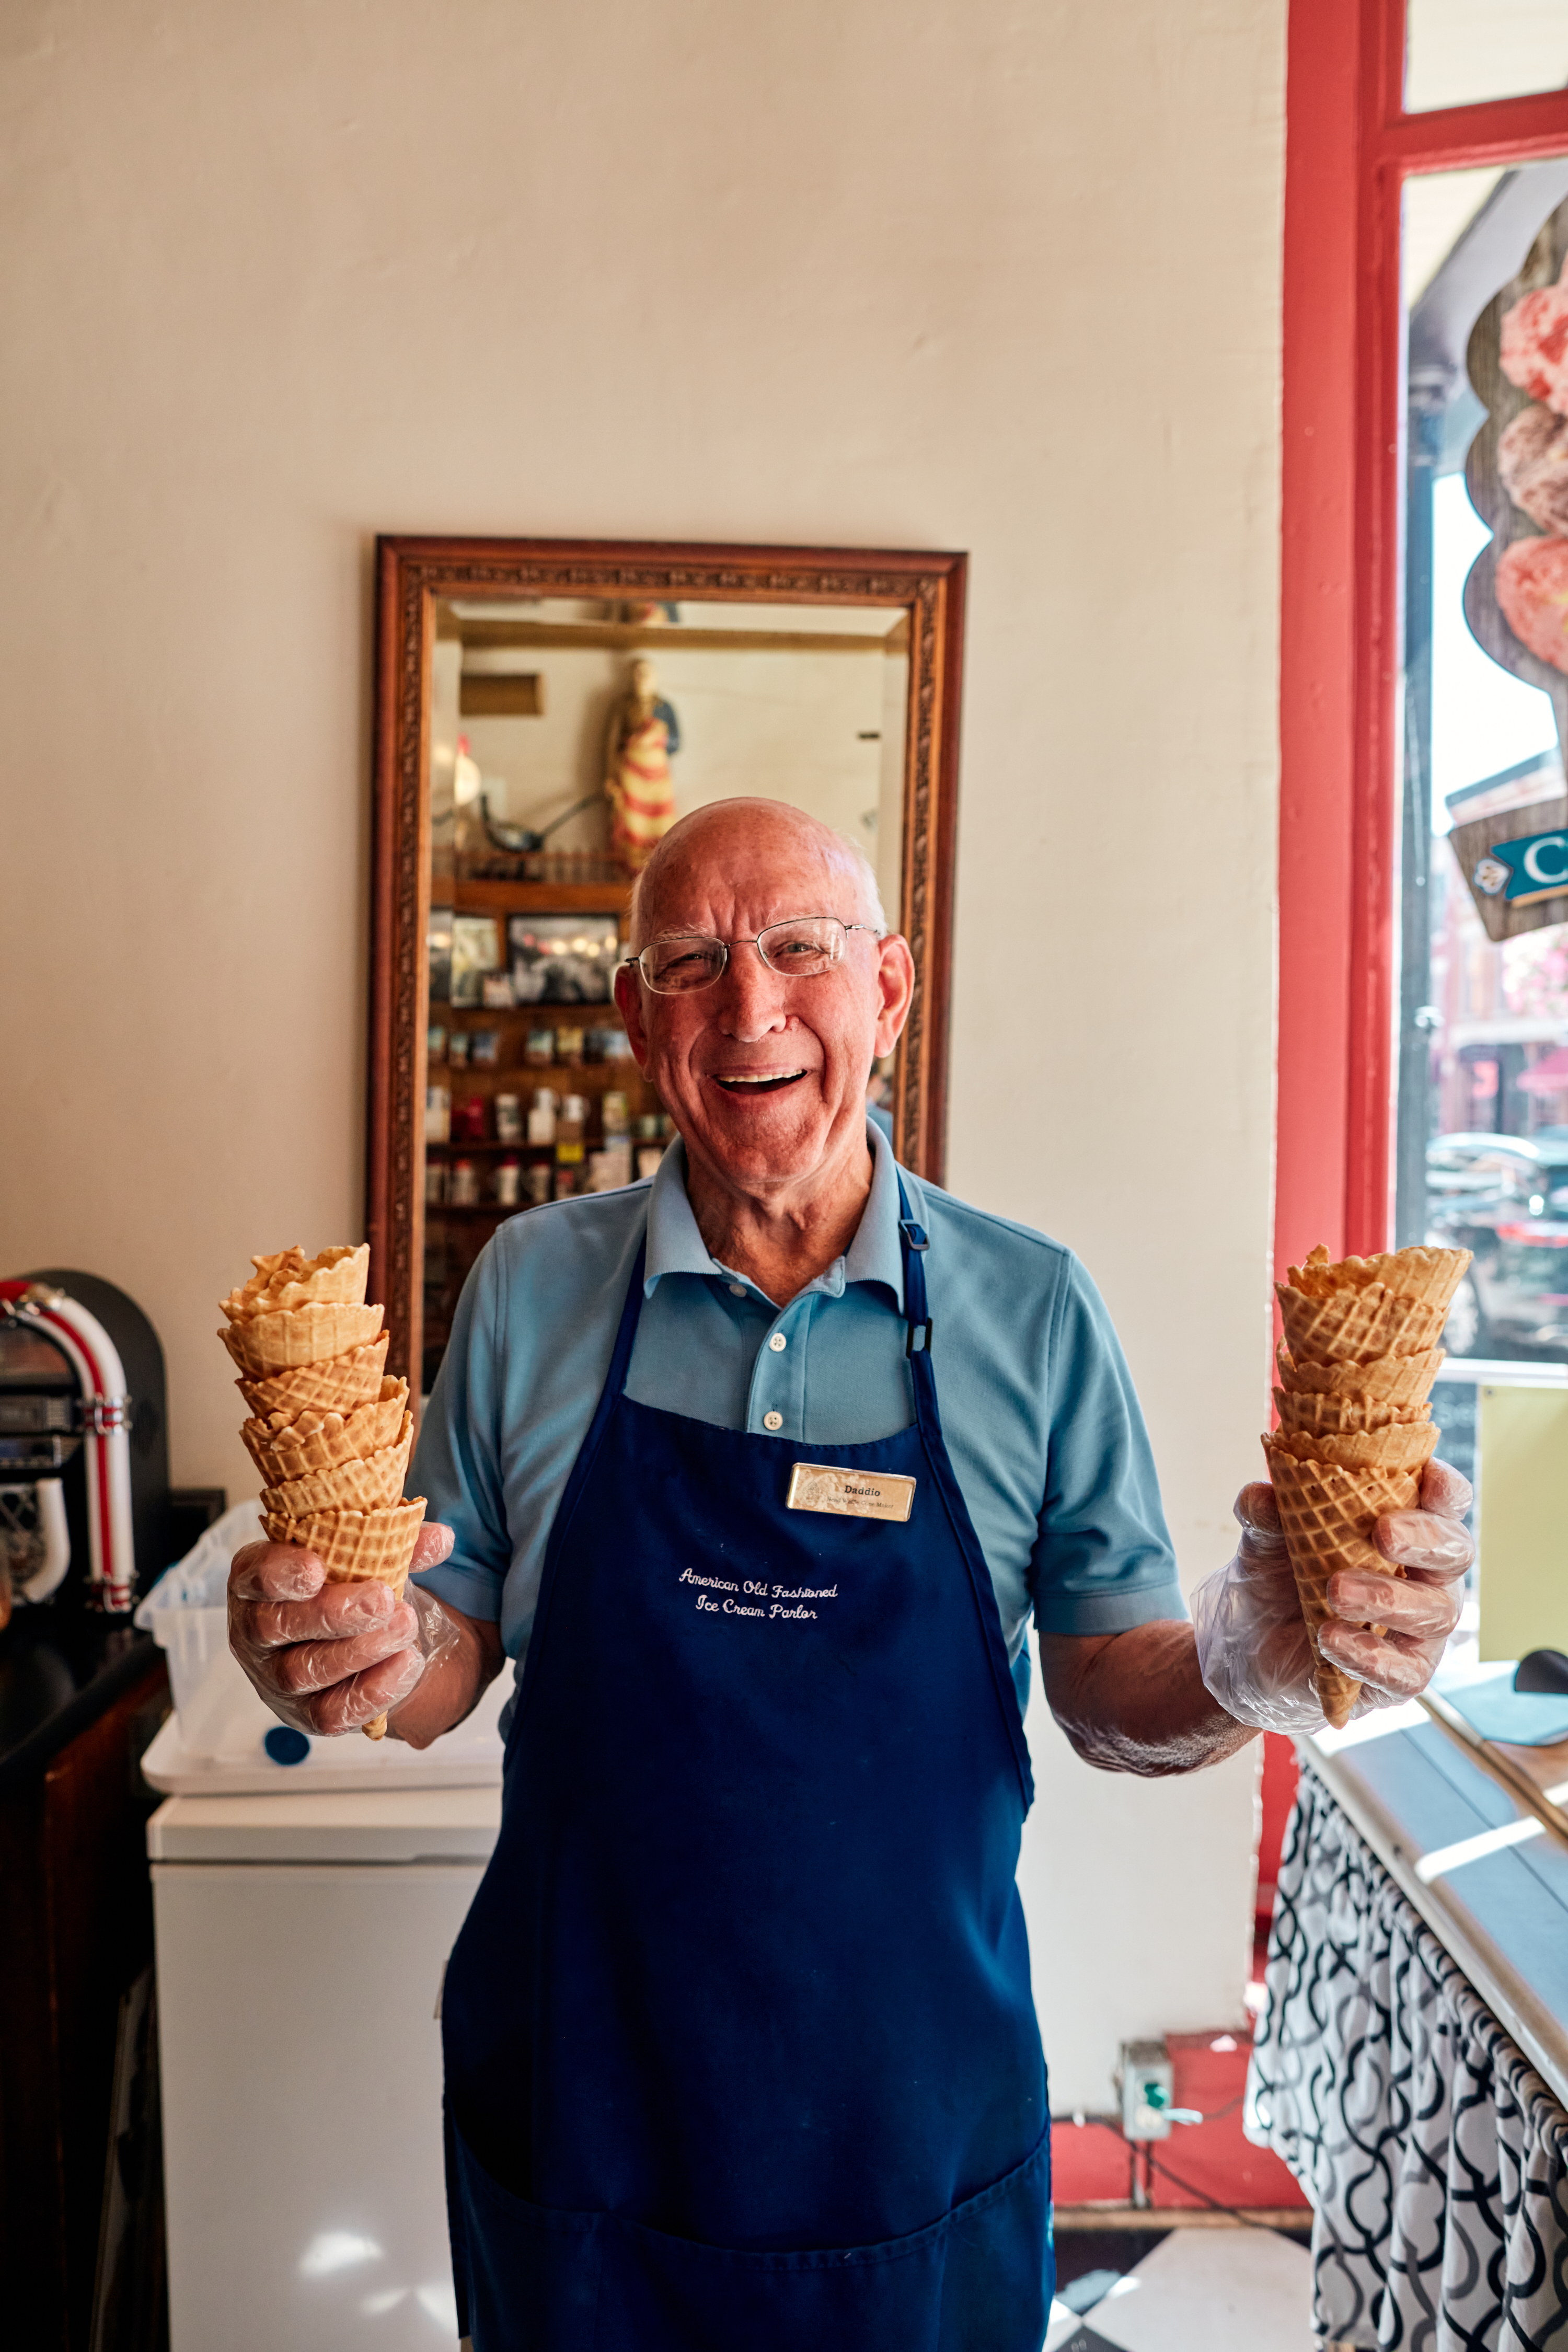 What Is The Oldest Ice Cream Parlor In The US?